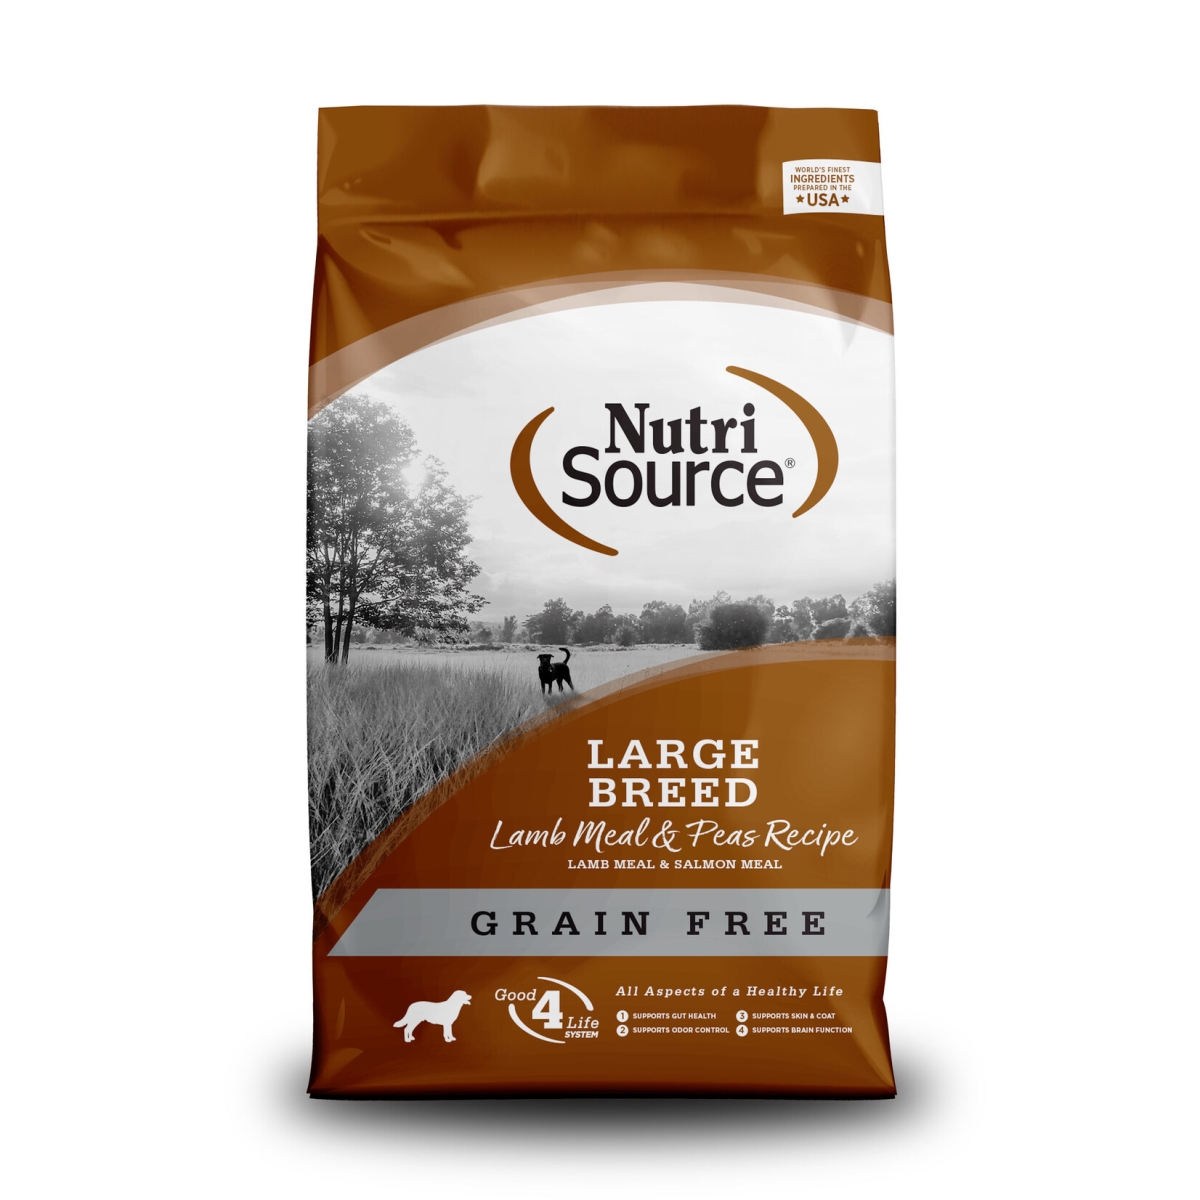 Picture of Nutri Source 872243 26 lbs Grain Free Large Breed Lamb Meal & Pea 23-14 lbs Dog Food for MP70